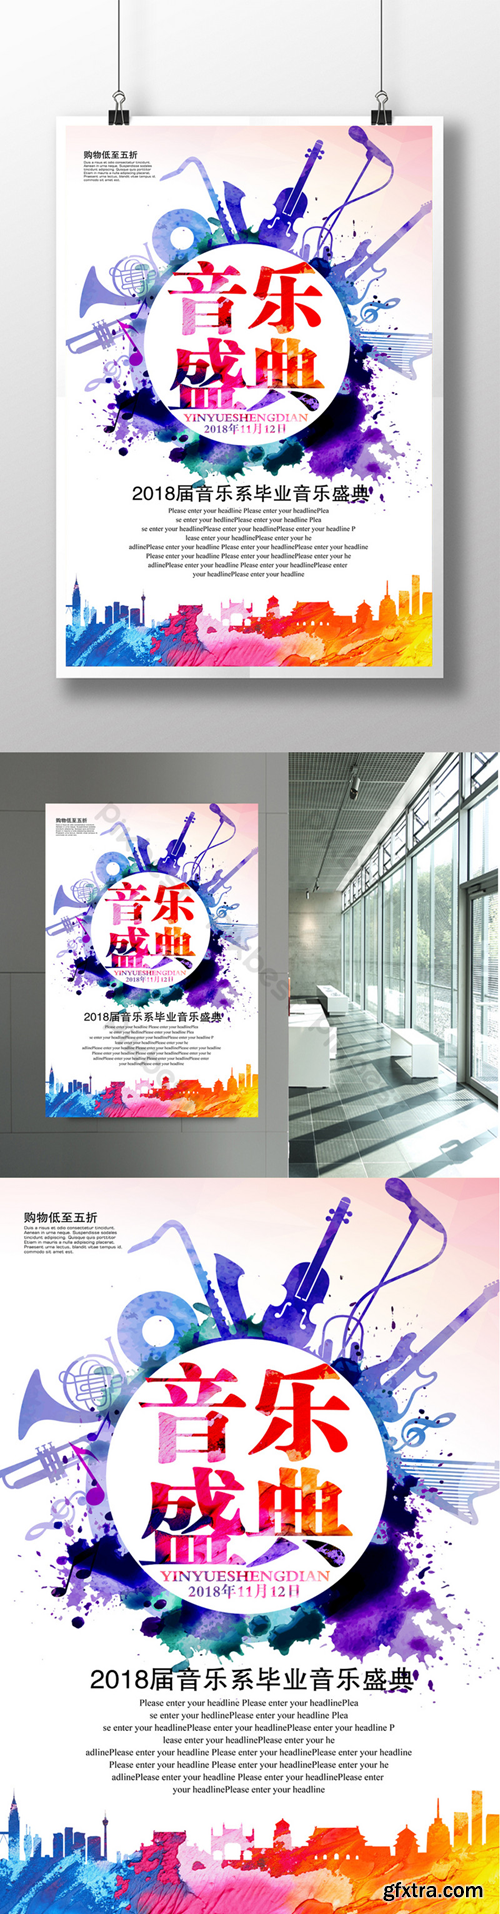 Watercolor Music Festival Poster Template PSD